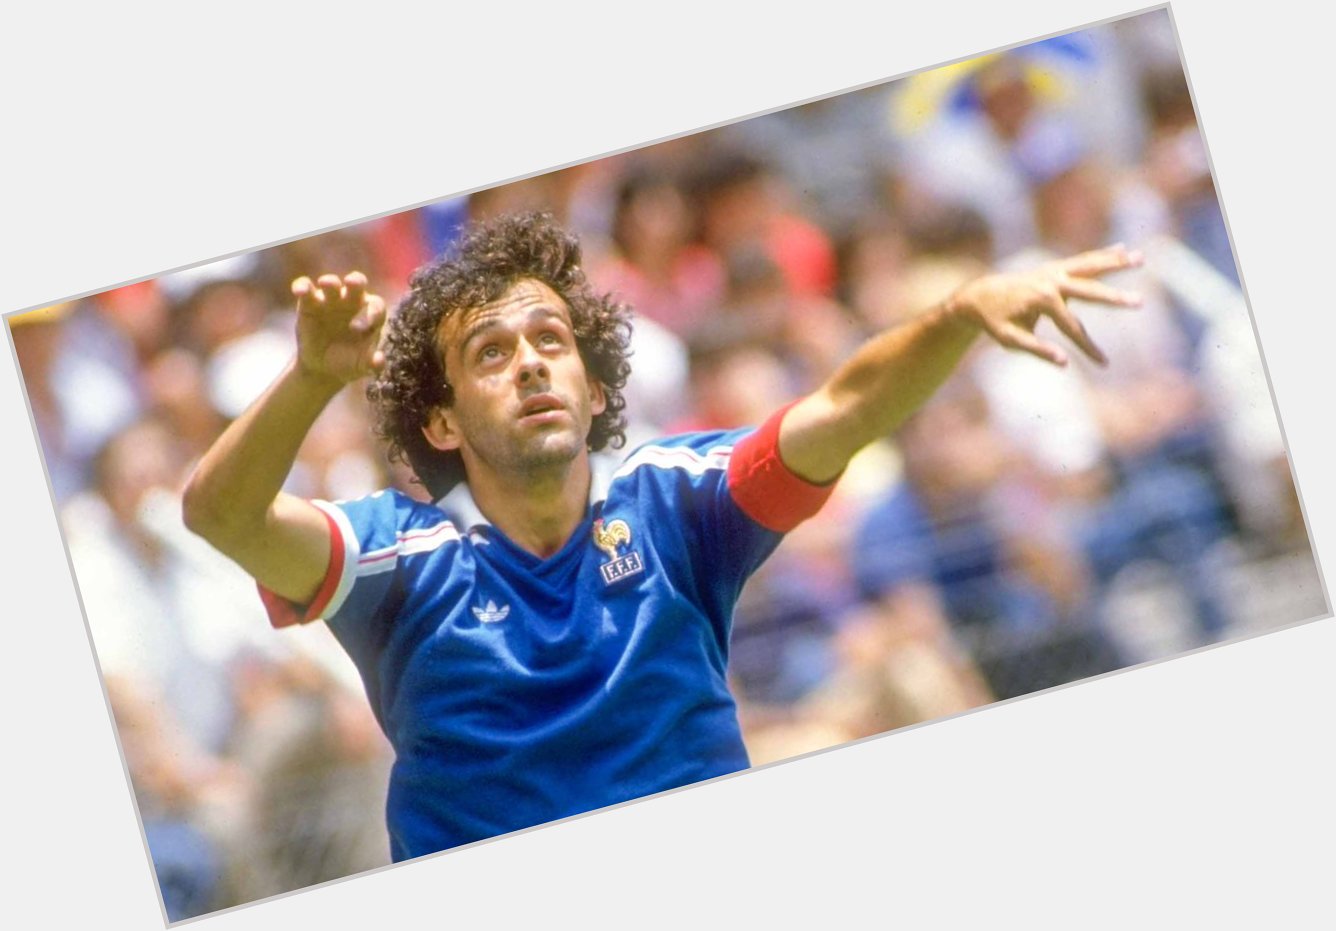 Happy 60th birthday to Michel Platini, who won just about everything as a player with Juventus and France 